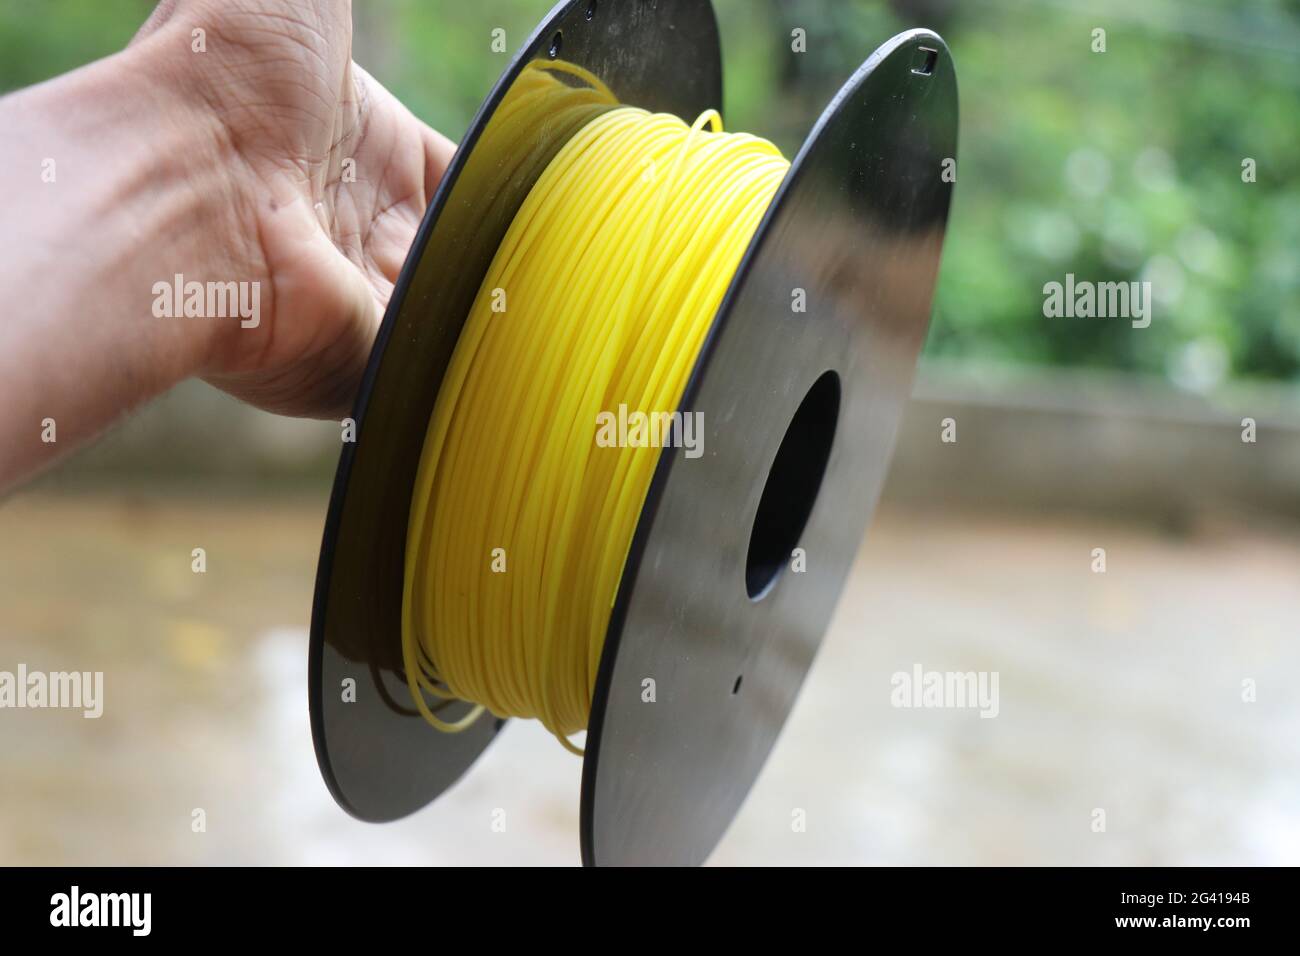 Filaments used in 3d printer on a spool held in hand. Stock Photo